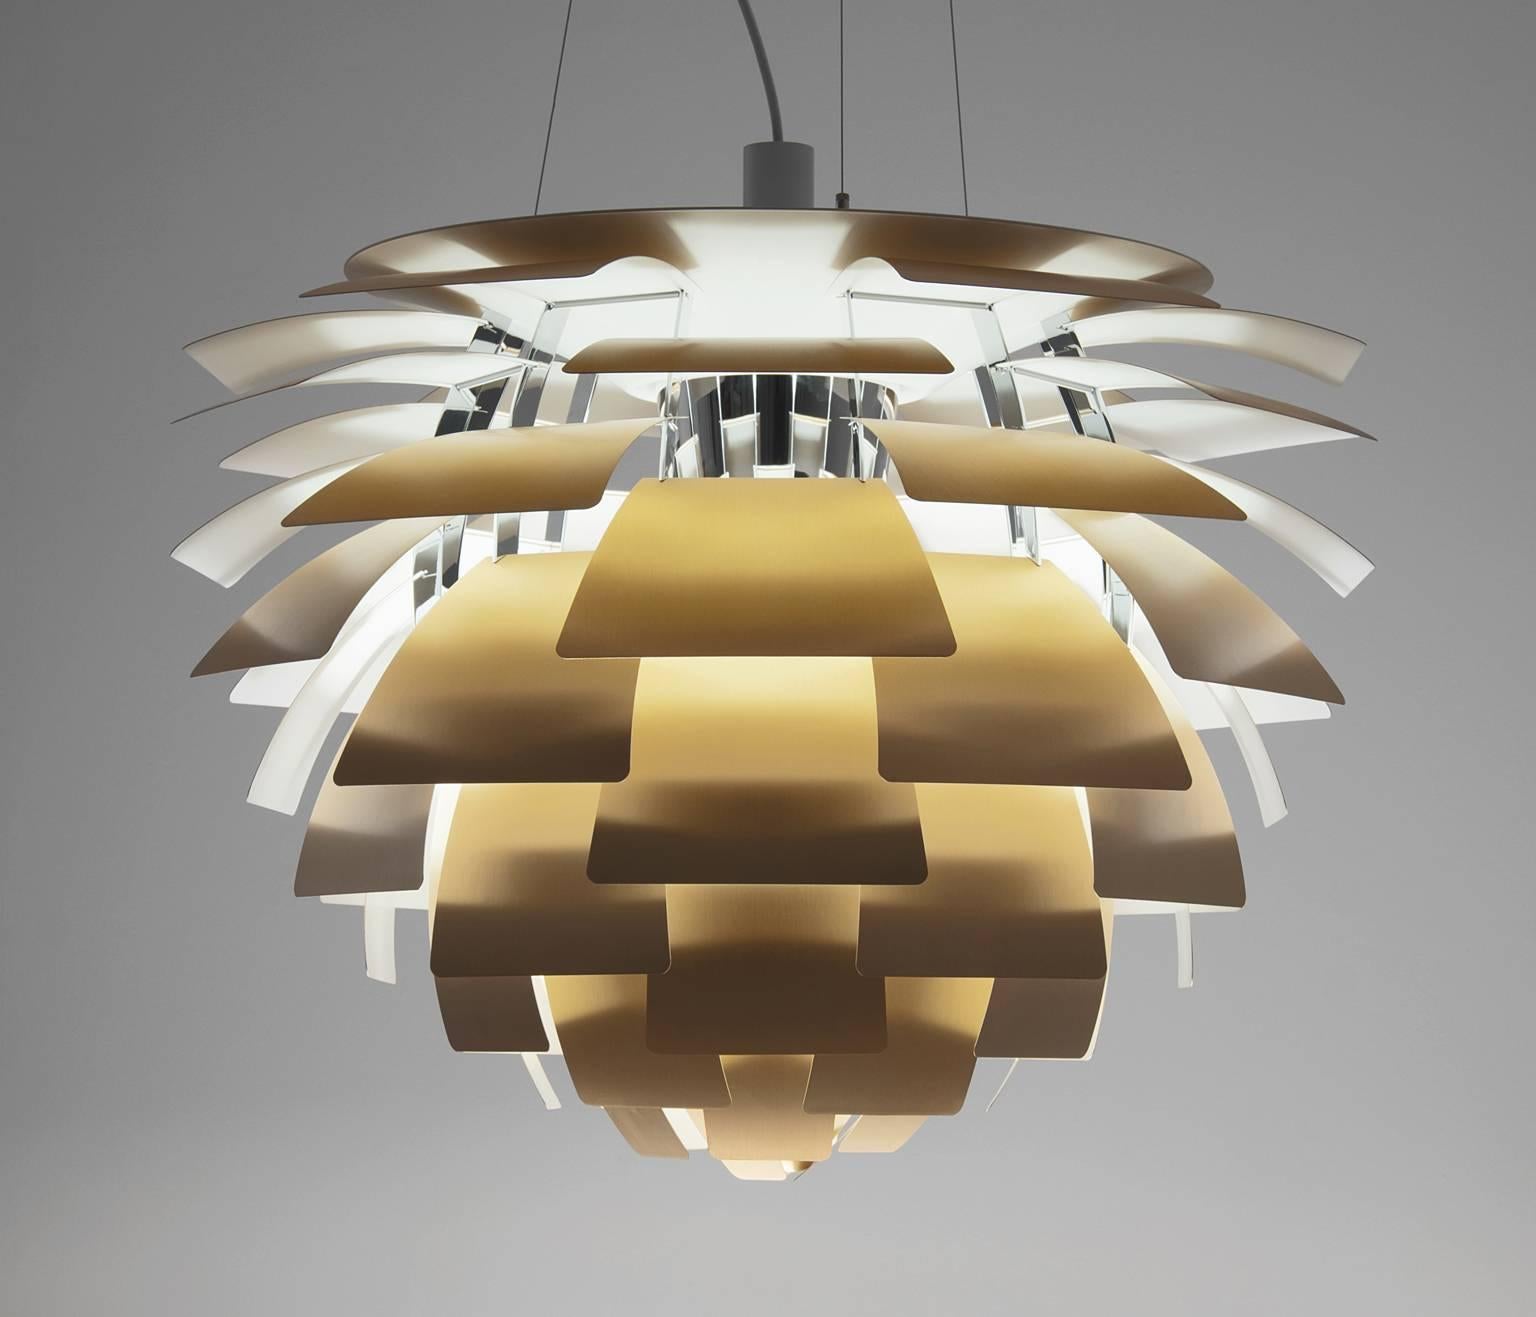 Limited edition gold 'Artichoke' pendant, in metal.  The 'Artichoke' pendant was originally designed by Poul Henningsen for Louis Poulsen, Denmark, in 1957. This version is a special re-edition manufactured in the 2010s. 

The Artichoke, an all